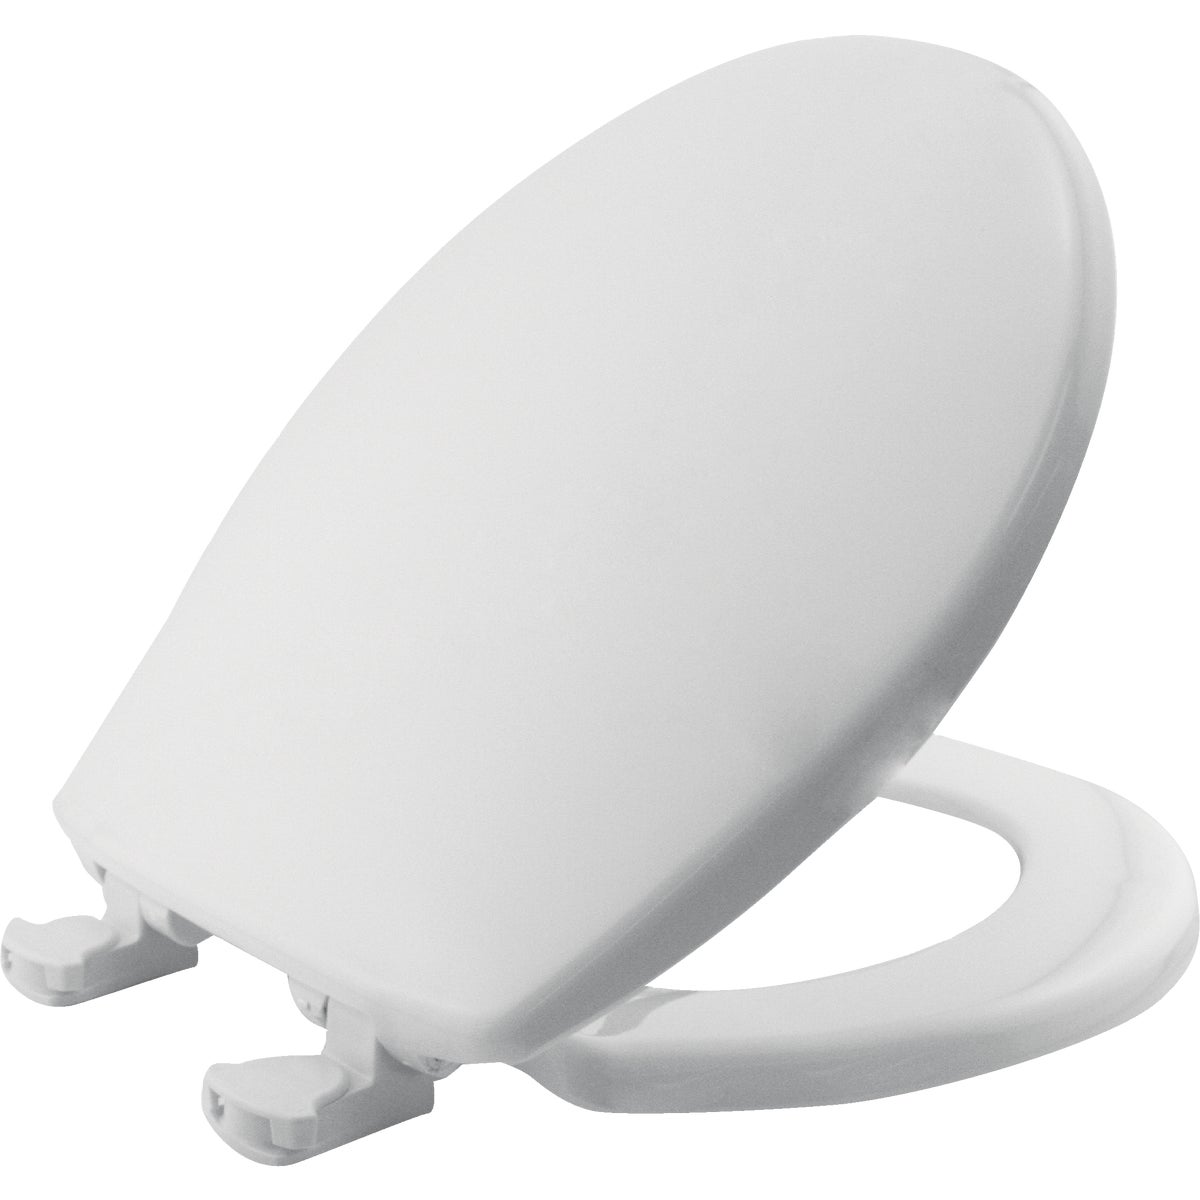 Item 401760, This resilient plastic toilet seat closes slowly to prevent slamming and 